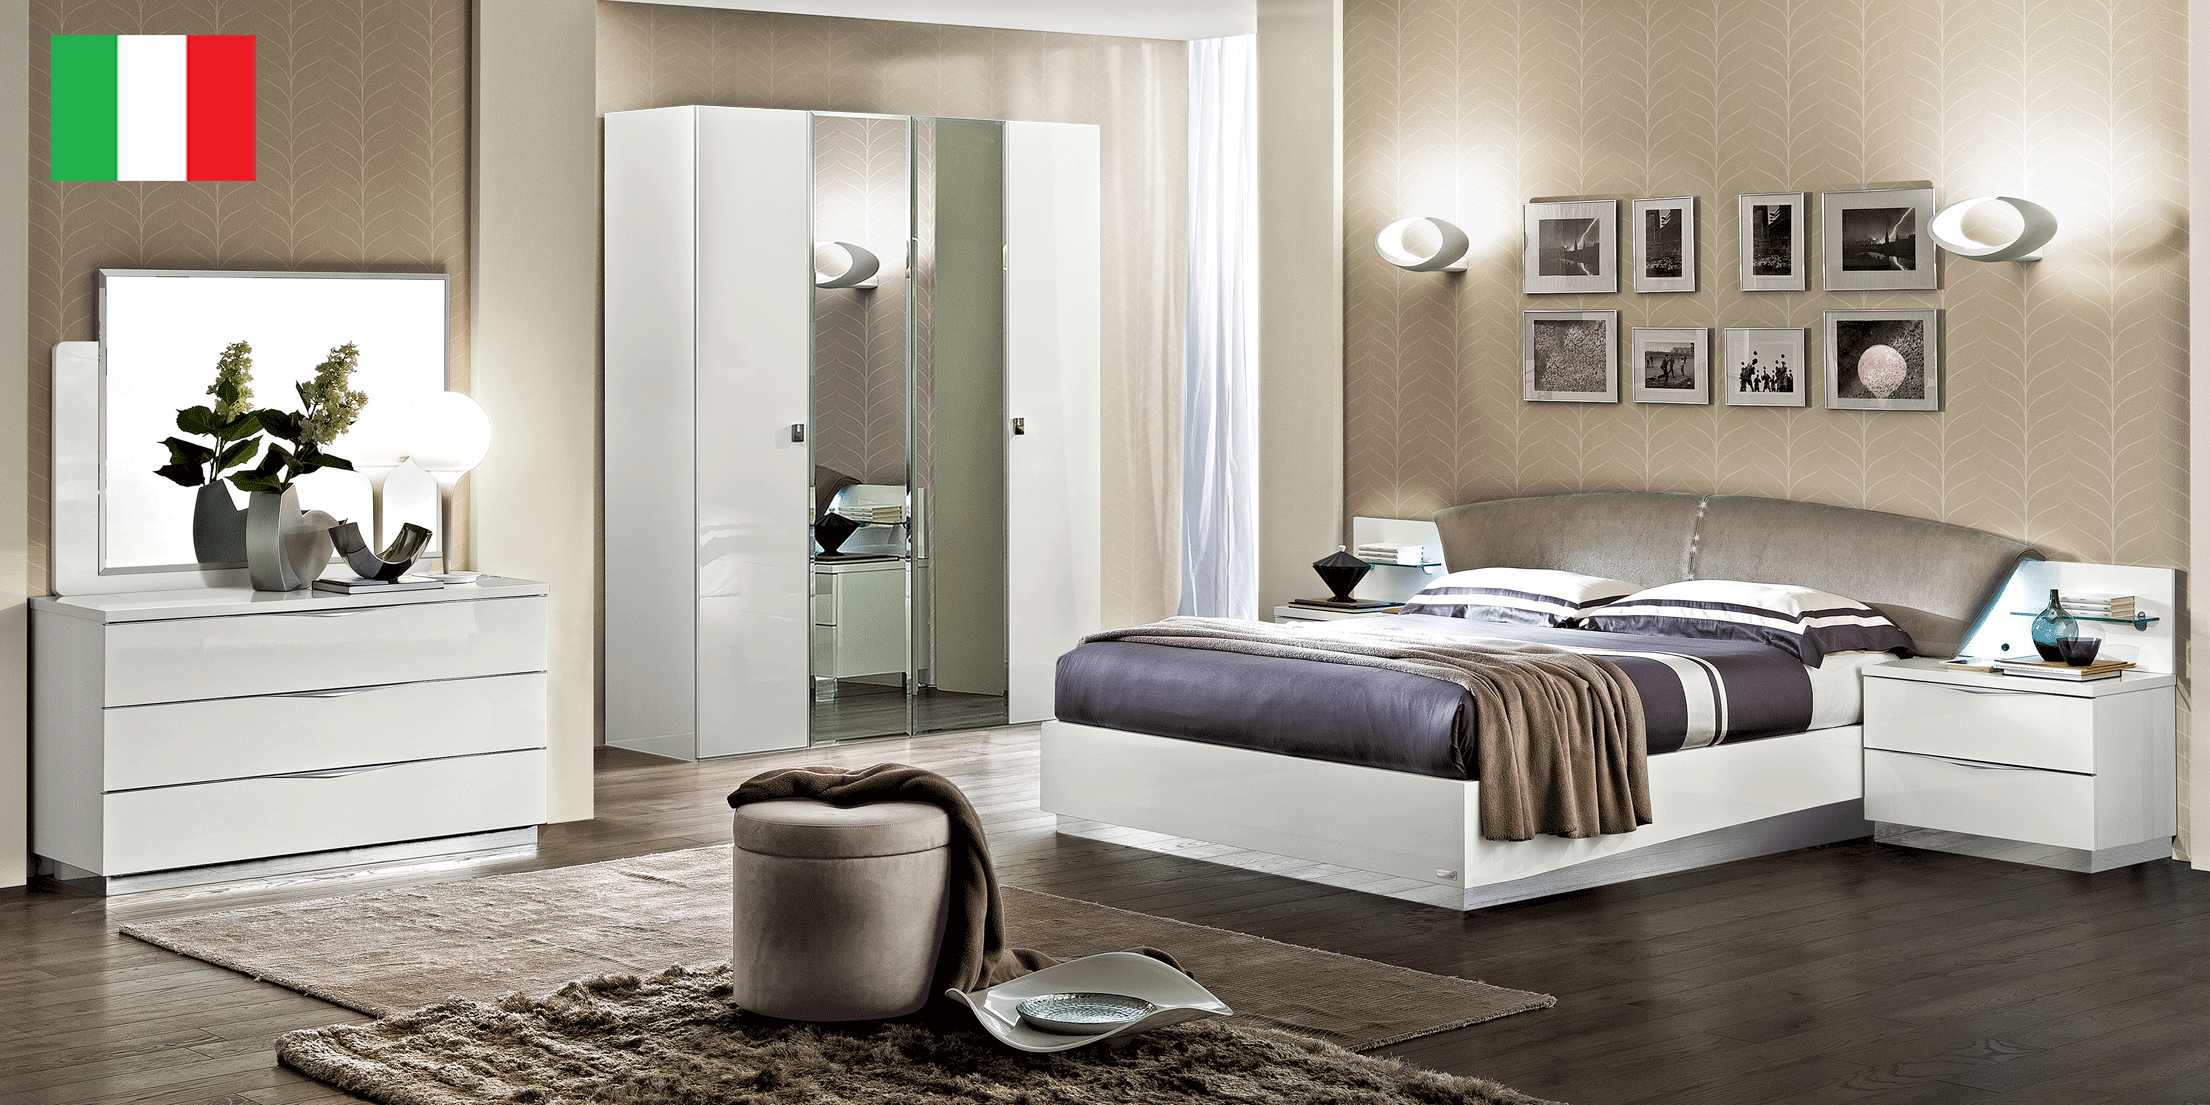 Brands Camel Classic Collection, Italy Onda DROP Bedroom WHITE